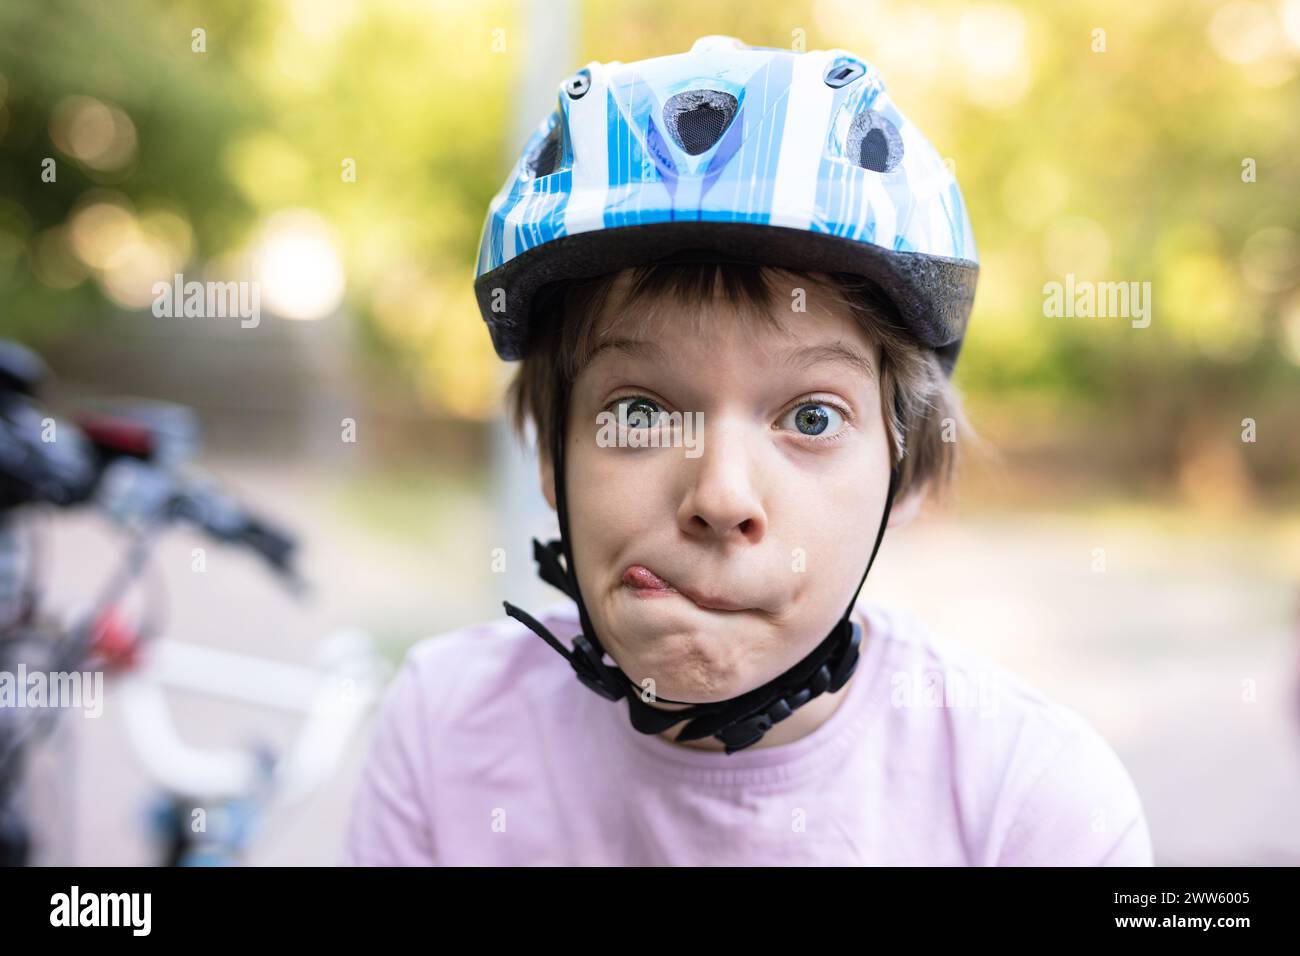 Young boy in helmet making faces outdoors Stock Photo